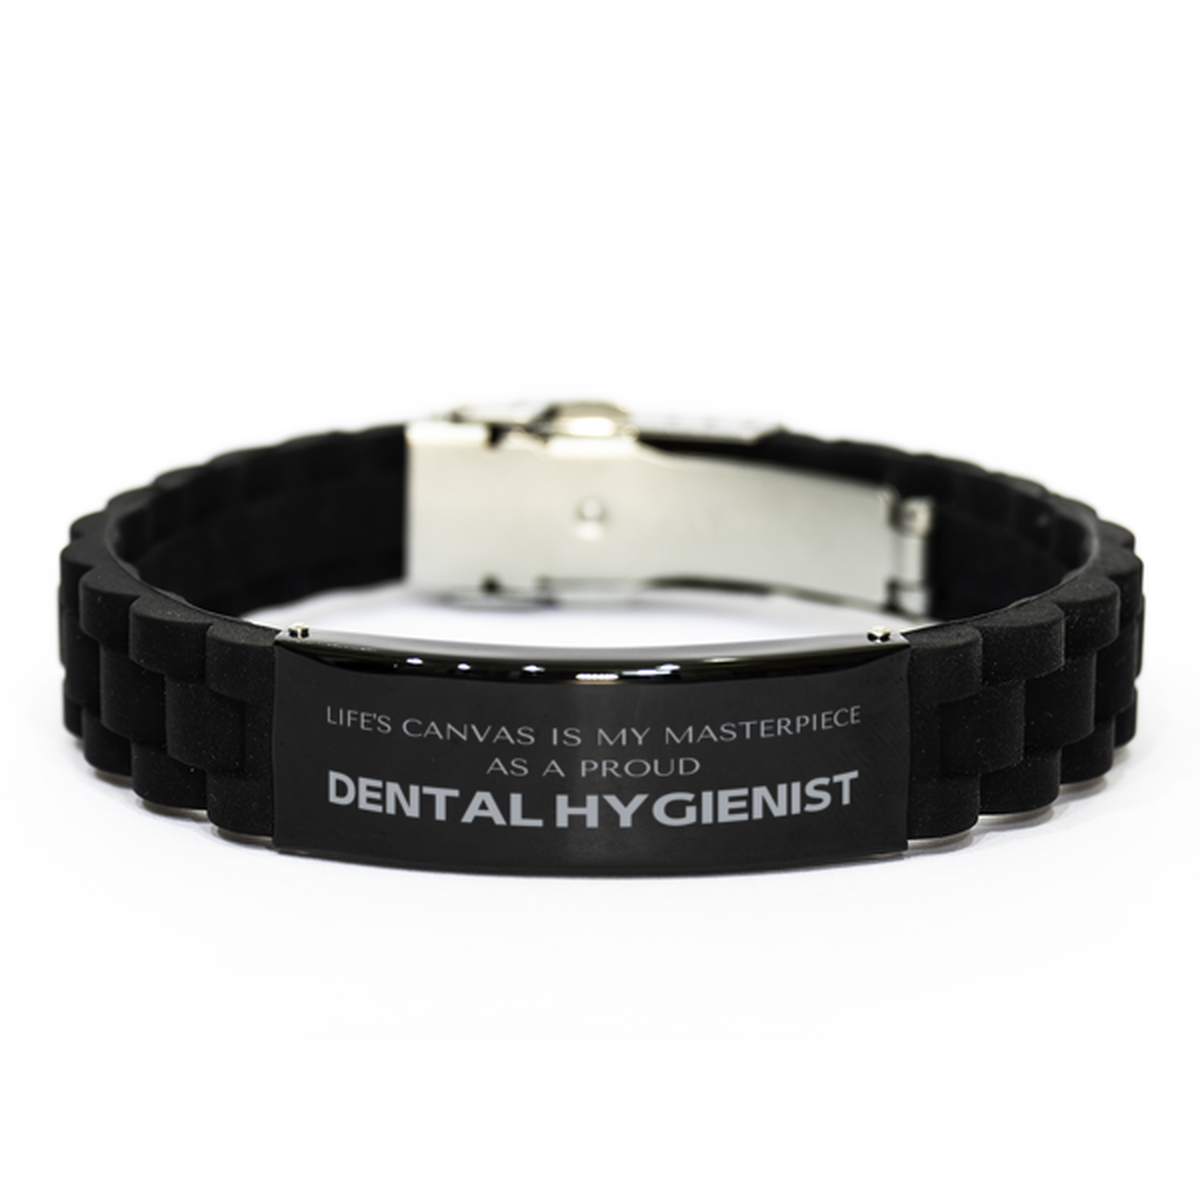 Proud Dental Hygienist Gifts, Life's canvas is my masterpiece, Epic Birthday Christmas Unique Black Glidelock Clasp Bracelet For Dental Hygienist, Coworkers, Men, Women, Friends